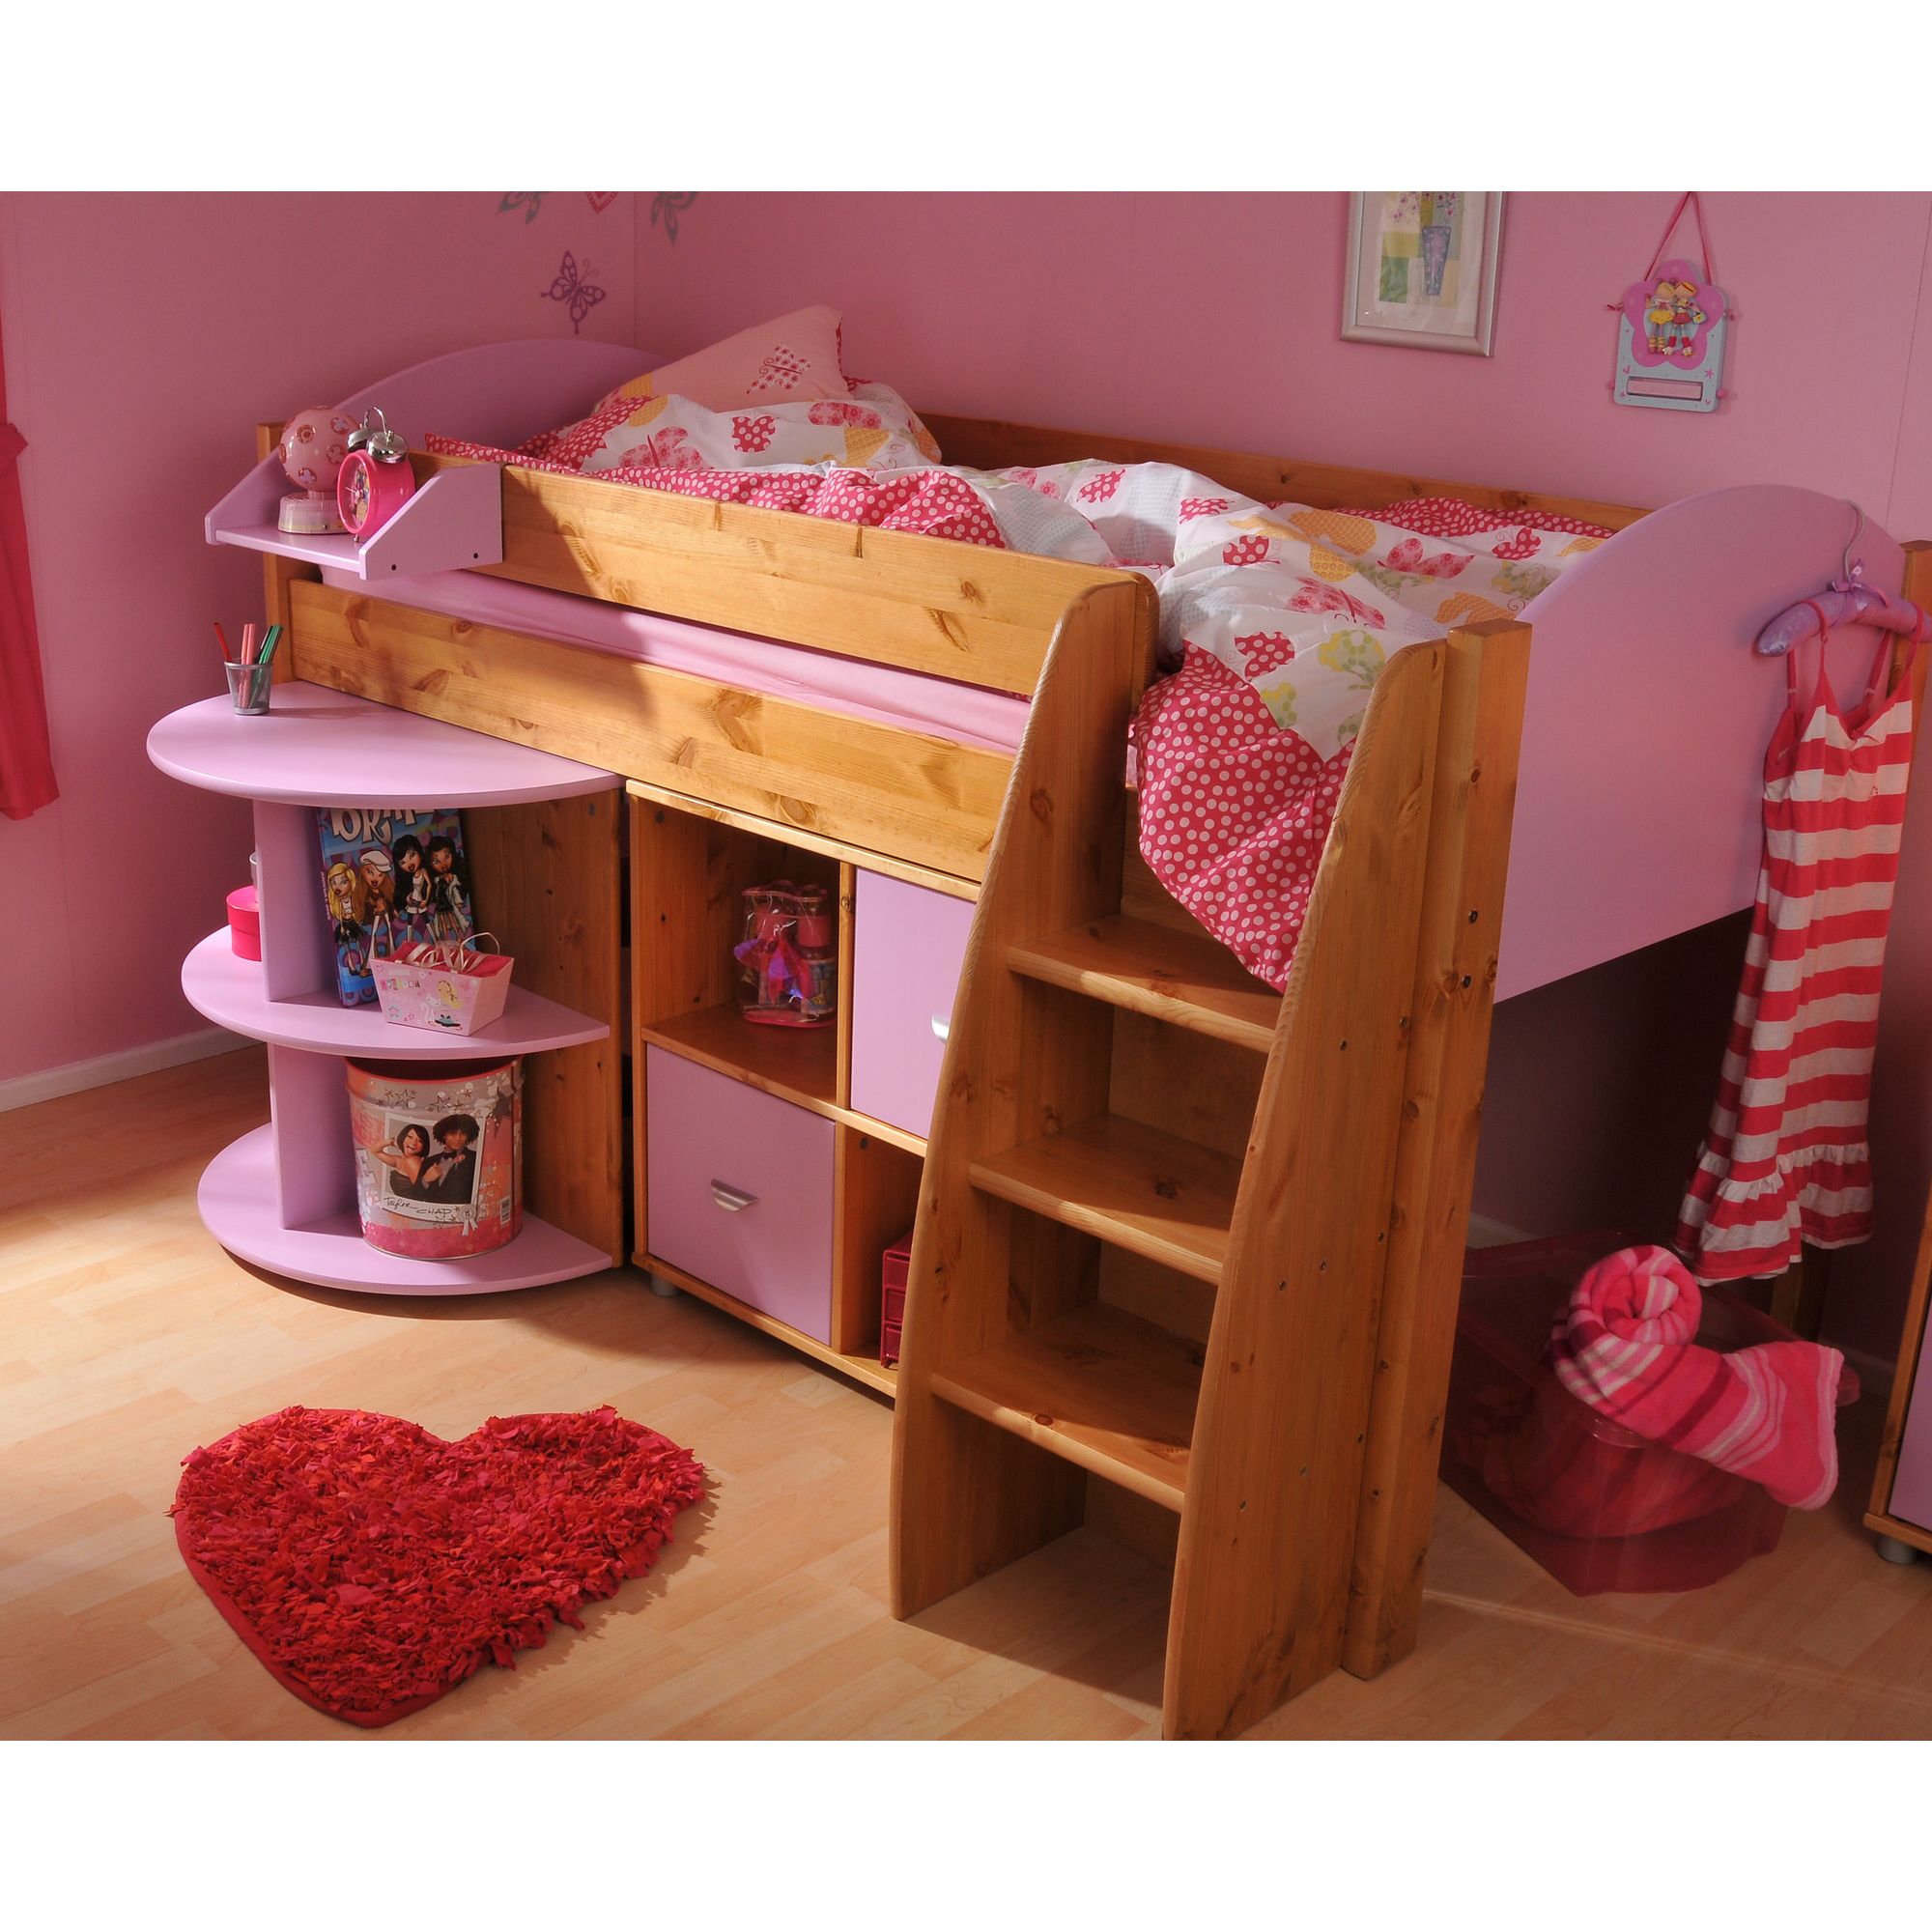 Stompa Rondo Mid Sleeper with Cube Unit and Extending Desk - Antique - Lilac at Tesco Direct